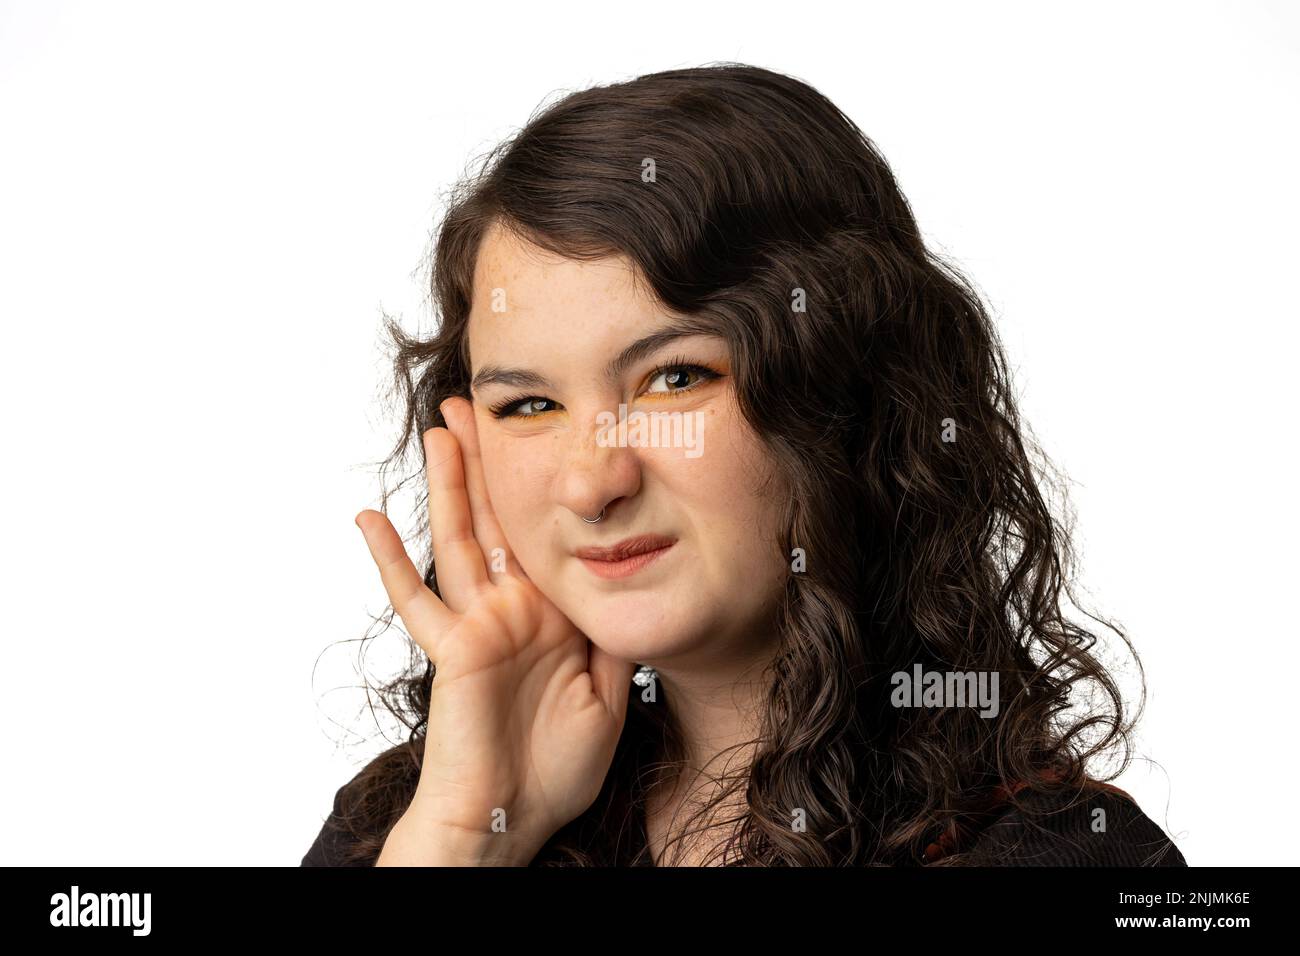 Young woman looking at camera while scrunching her nose, on white background Stock Photo